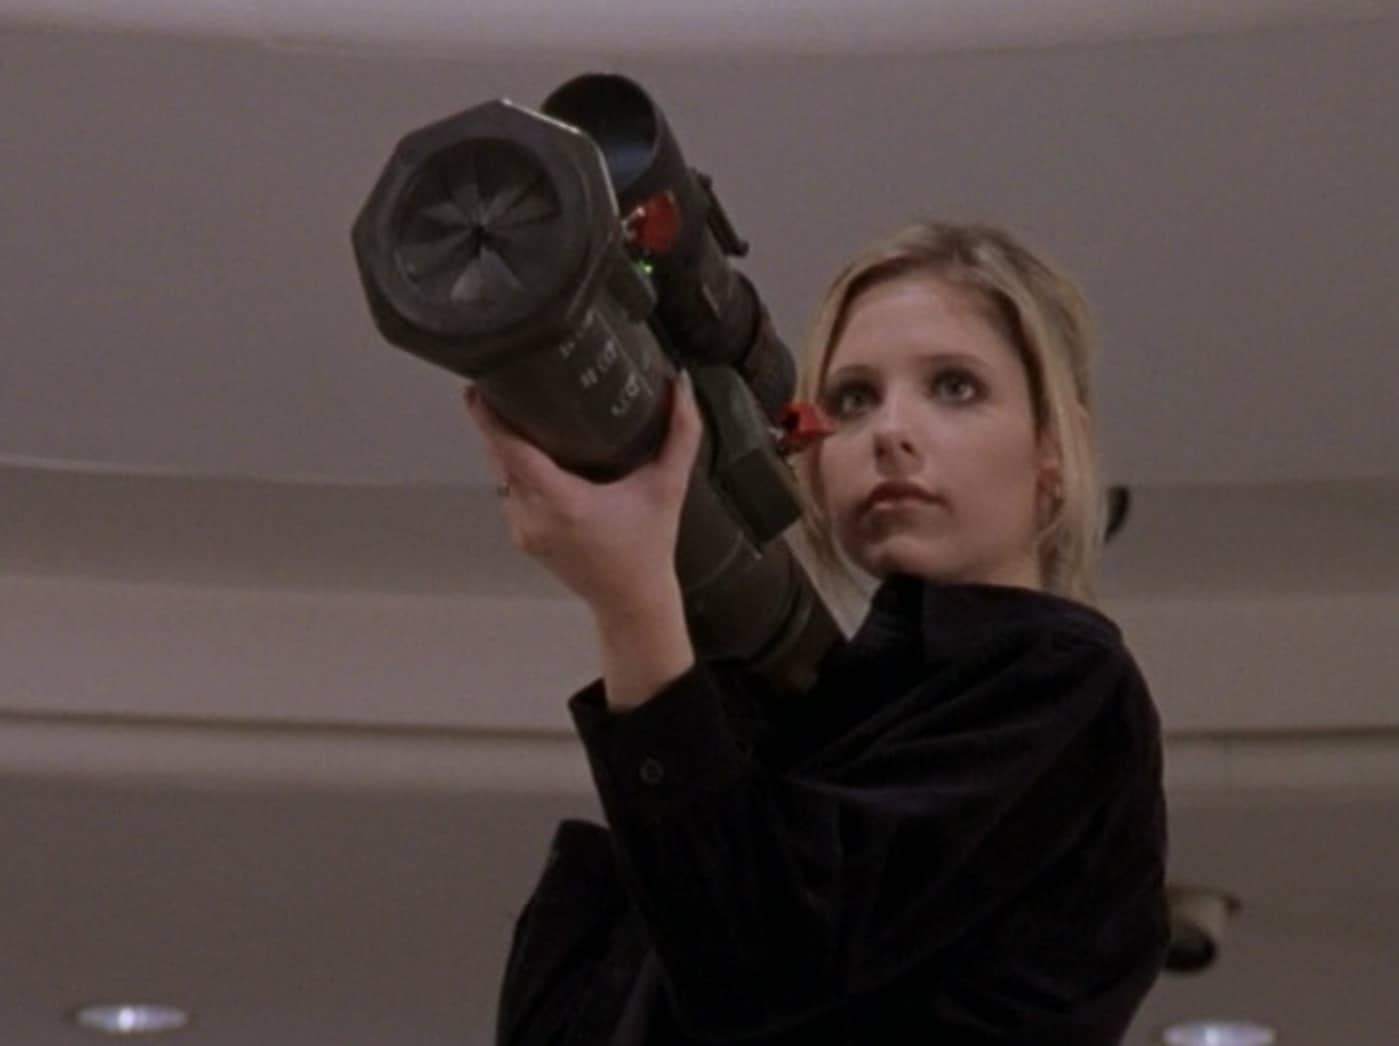 Buffy the Vampire Slayer with AT4 Anti-Tank weapon